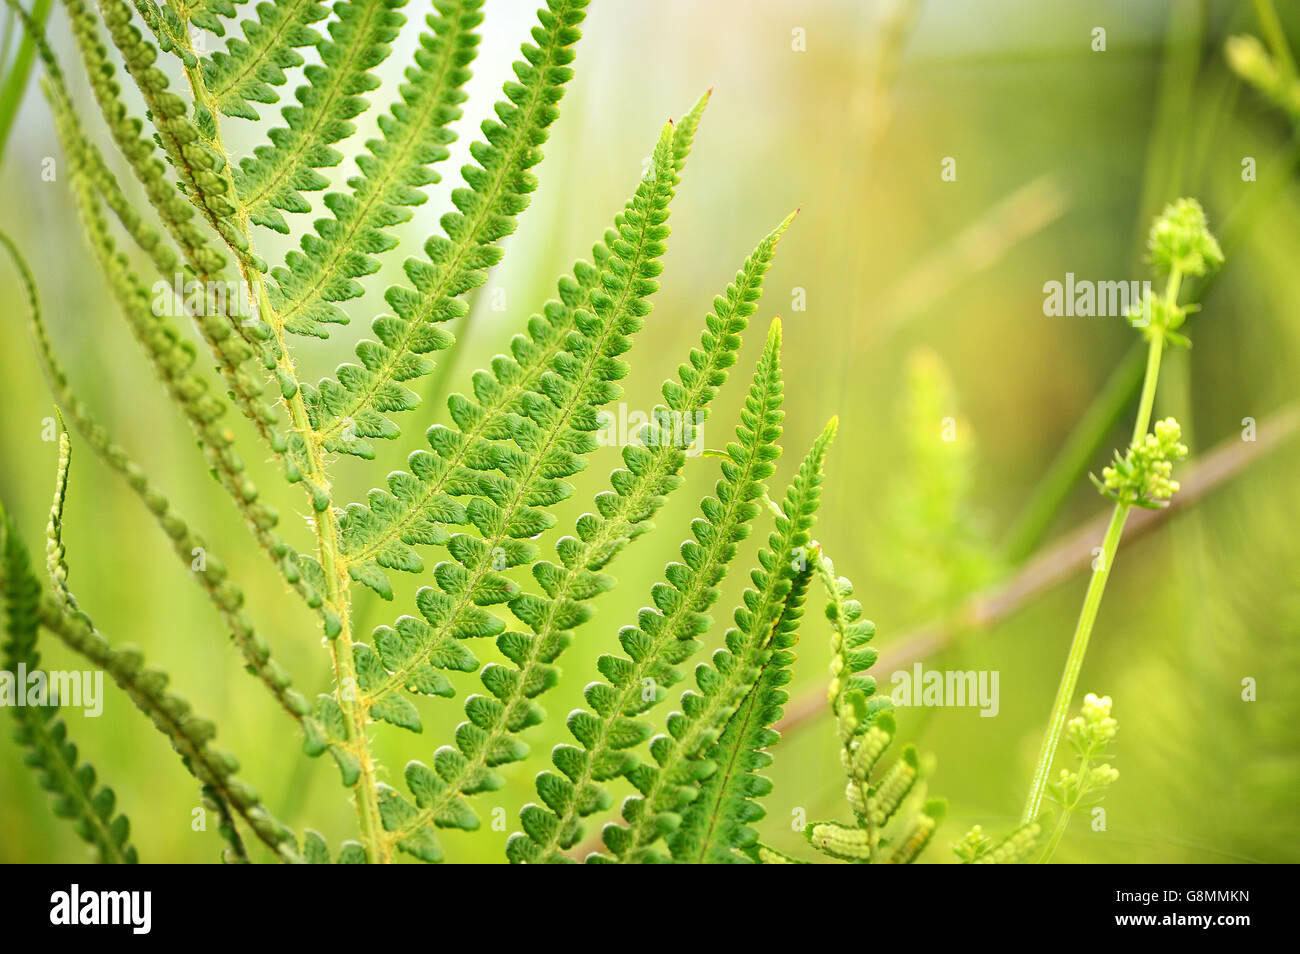 Green fern against pale green background Stock Photo